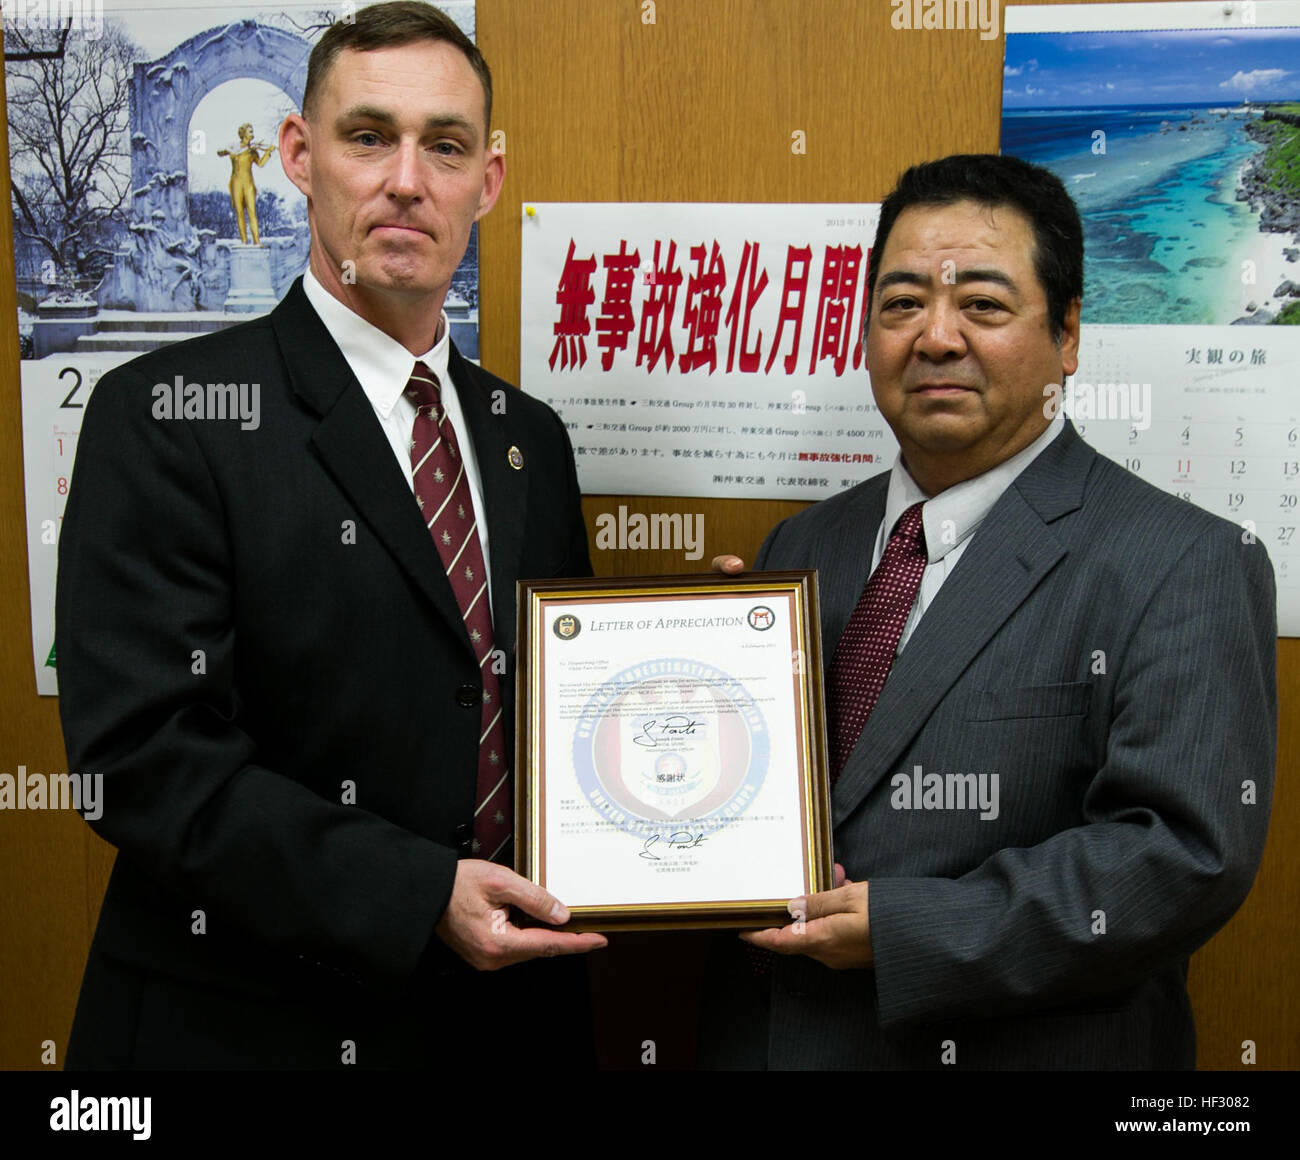 U.S. Marine Chief Warrant Officer Joseph Ponte, left, poses alongside Kazunari Agarie with the letter of appreciation awarded to Okito Taxi Company Feb. 24 during a visit to Okito Taxi Company in Urasoe City, Okinawa. The Okito Taxi Company, contracted with the Army and Air Force Exchange Service, was recognized not only for their efforts in solving a credit card fraud case, but also turning in items left in taxis by service members. “In law enforcement, we rely on many different relationships with people who may have information to help us solve our investigations,” said Ponte, a native of Po Stock Photo